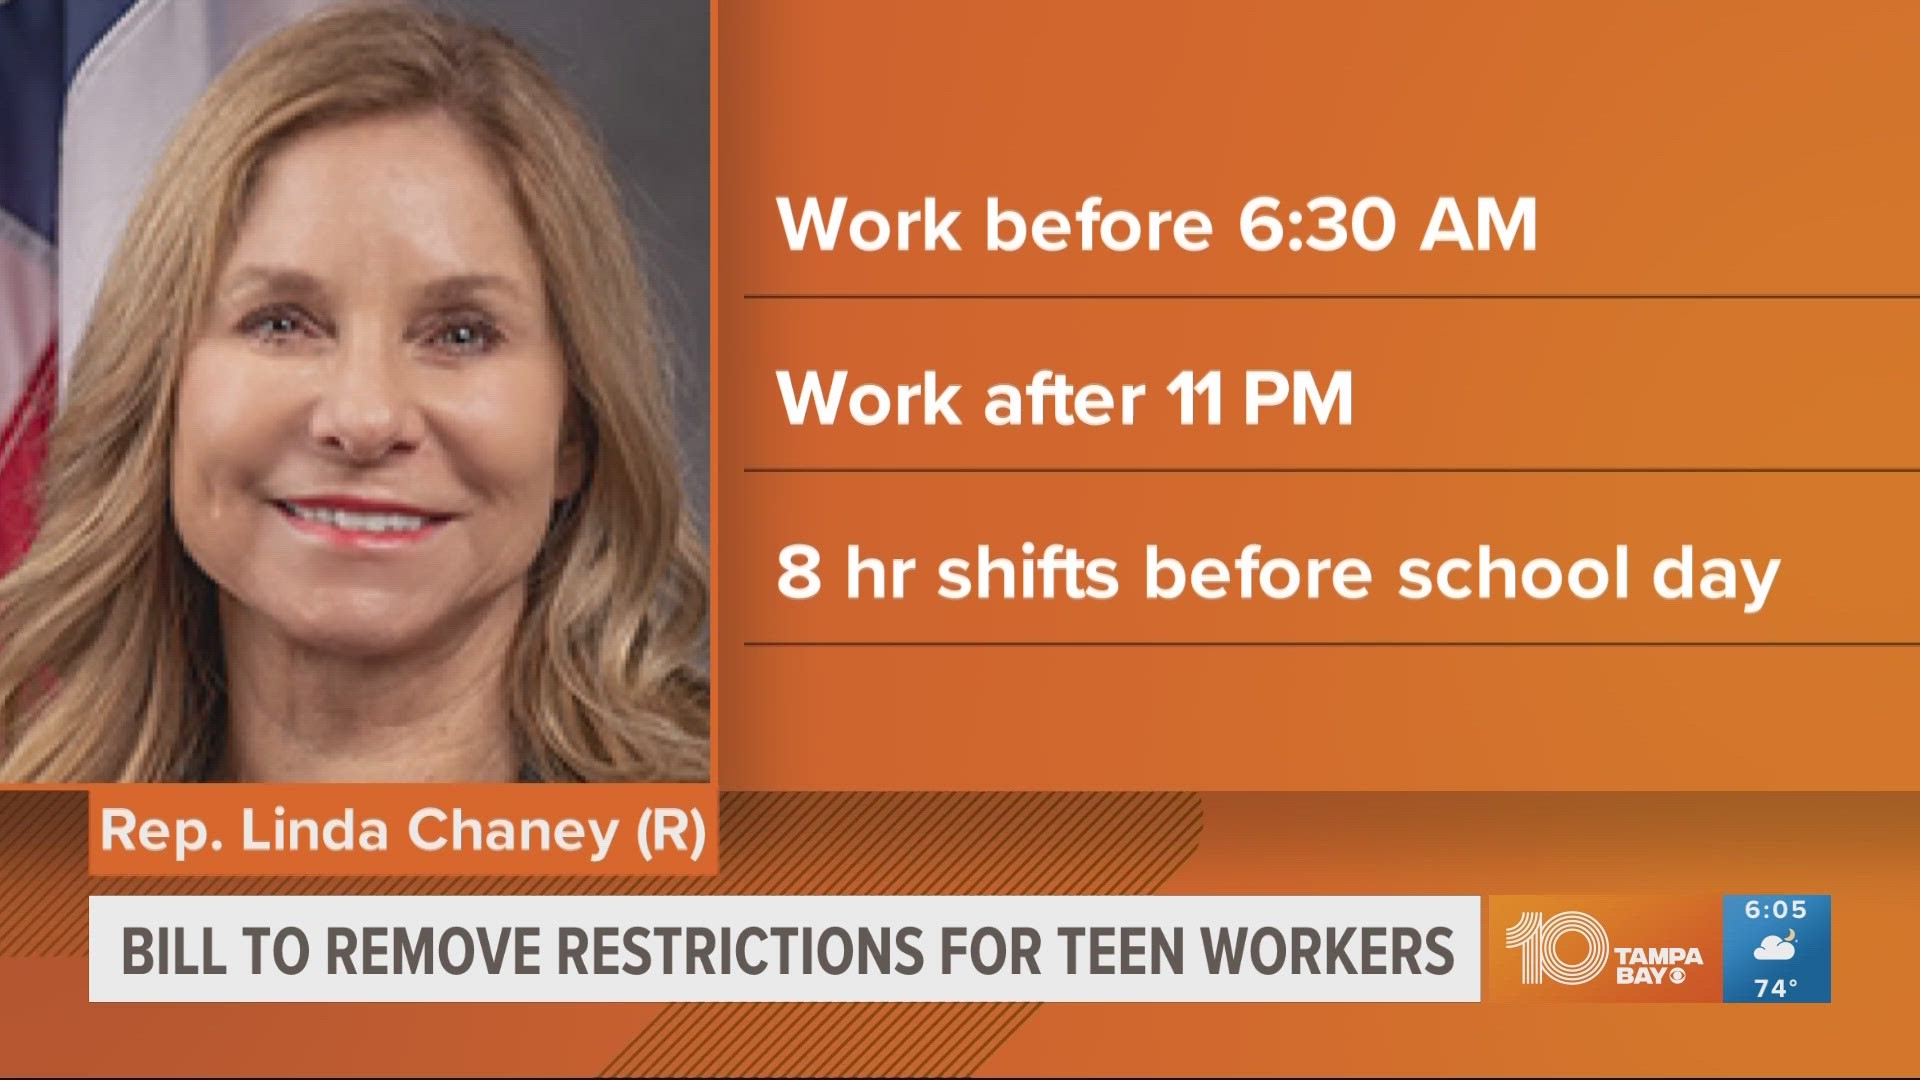 If the bill is passed, 16-to-17-year-olds could end up working overnight shifts, even when school is in session.